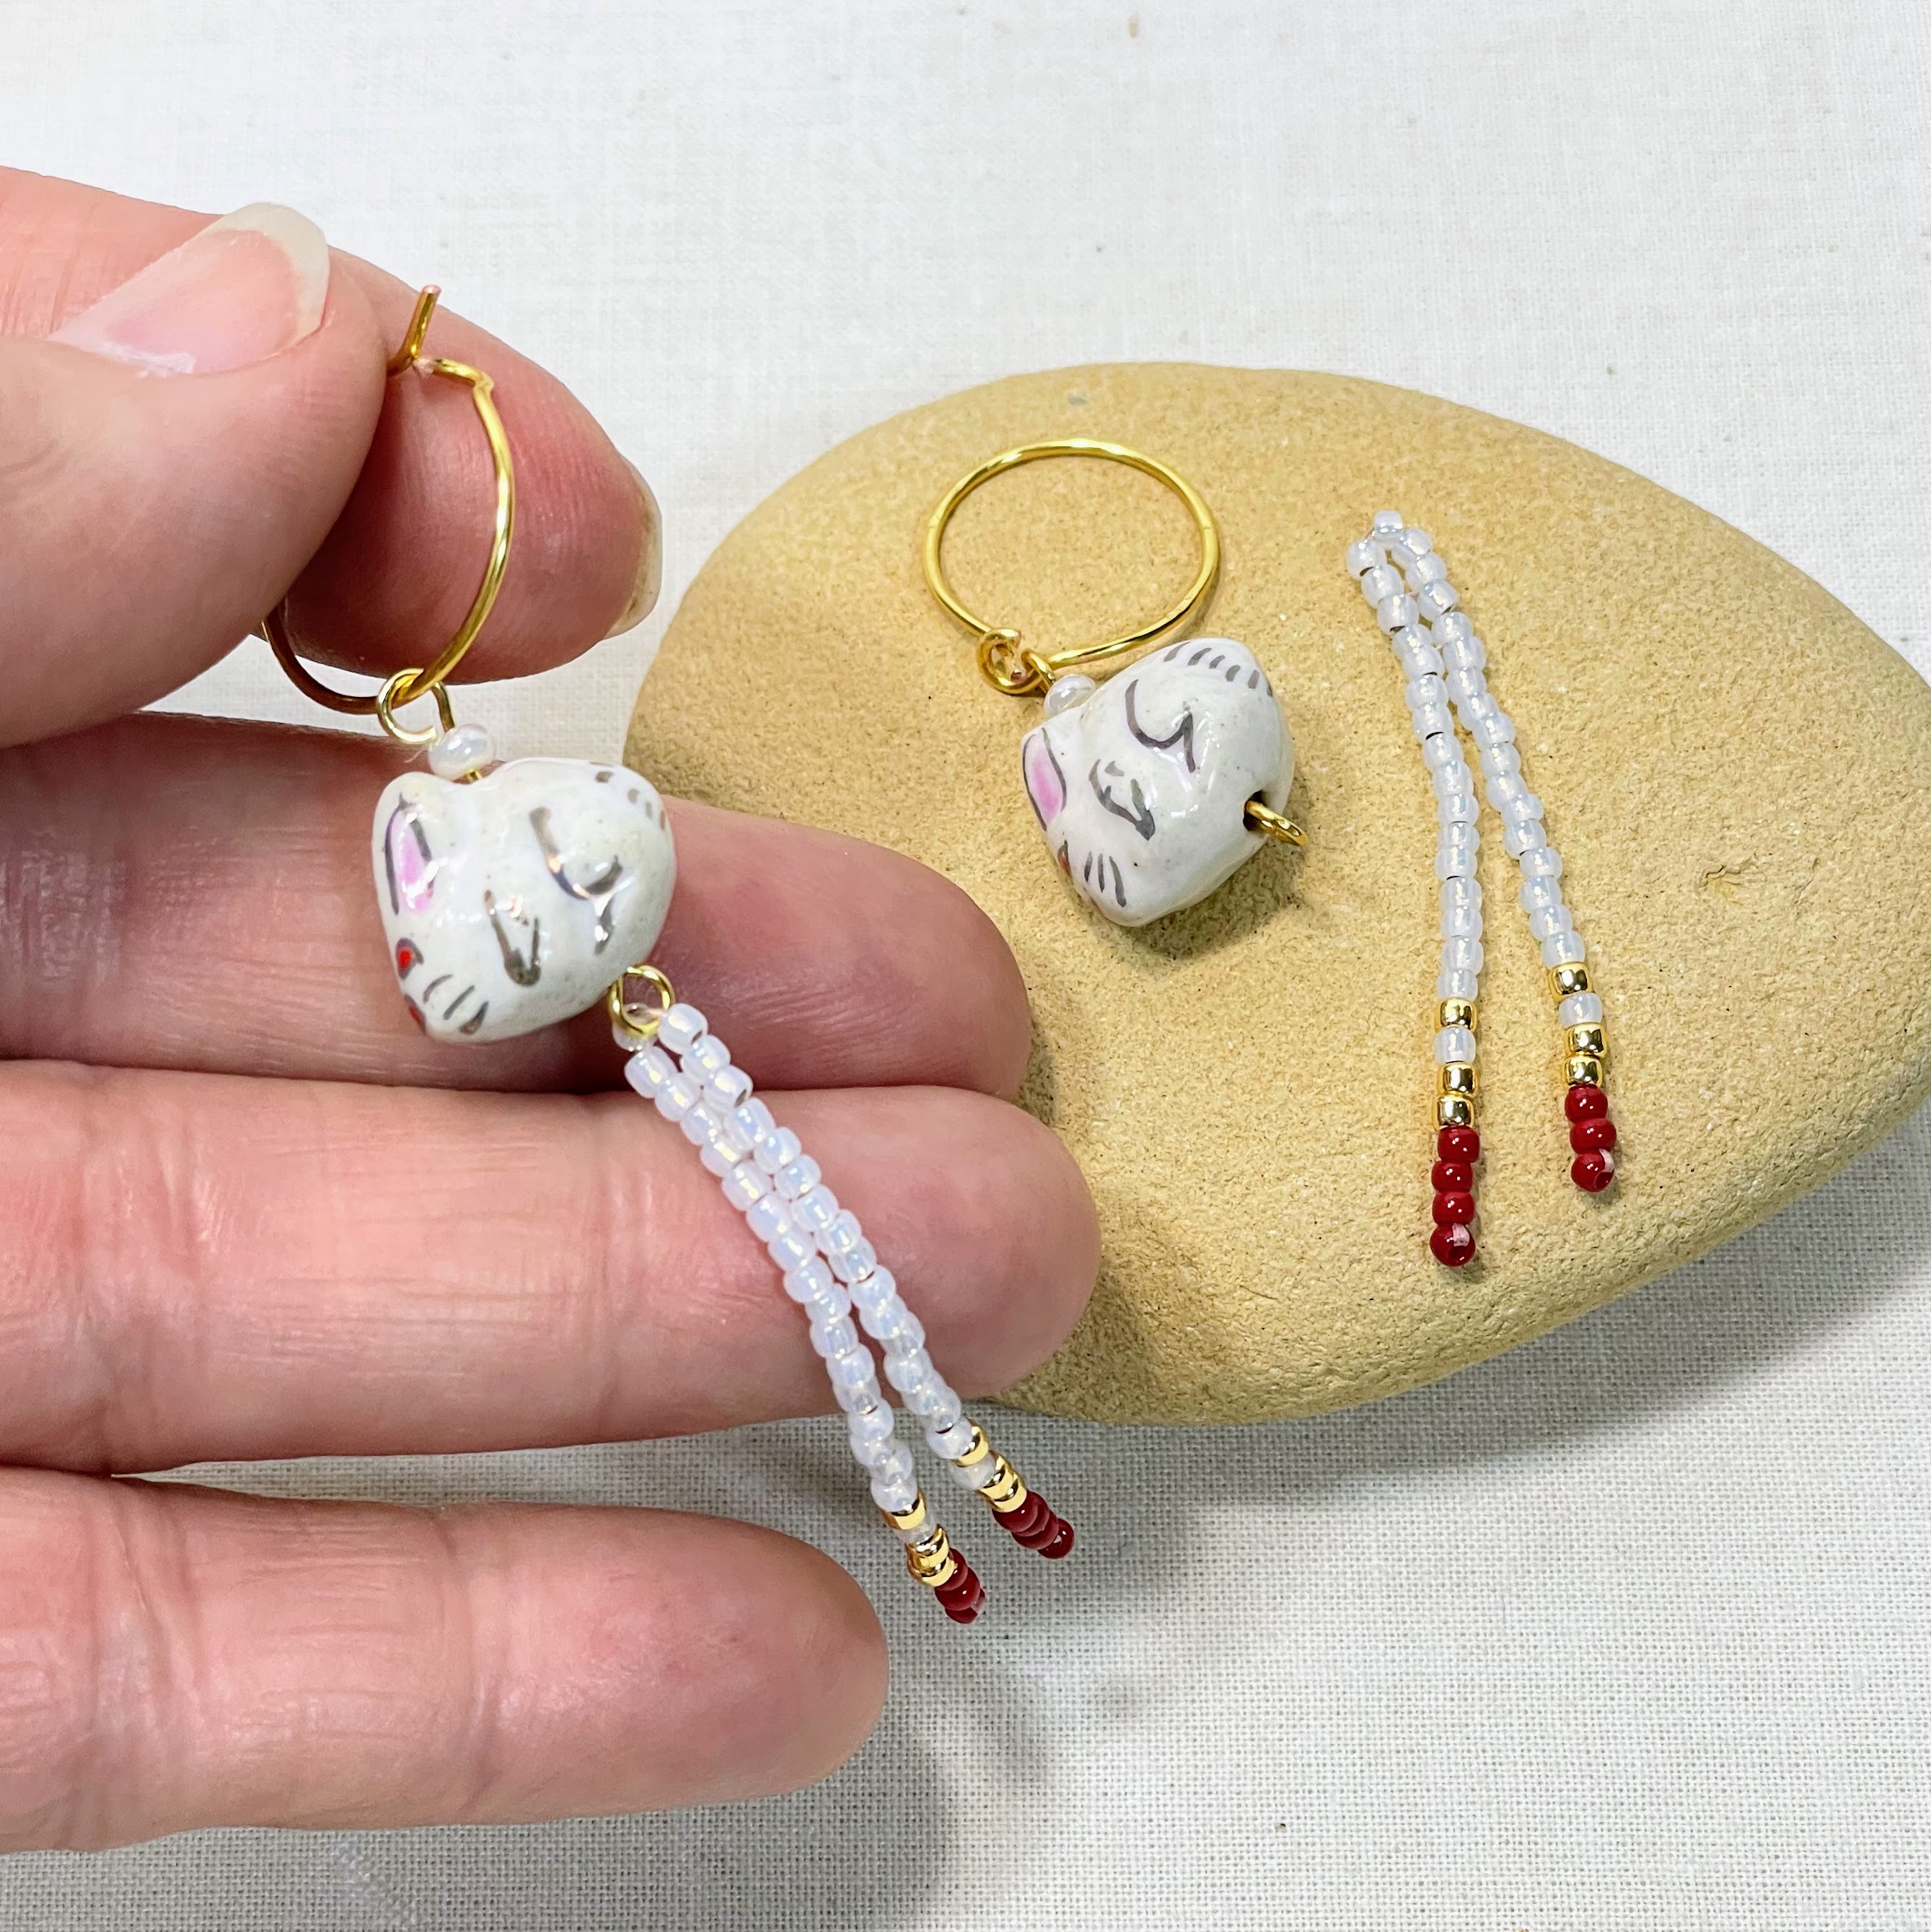 Lisa Yang Jewelry : Making Love Letter Bead Earrings with Wire